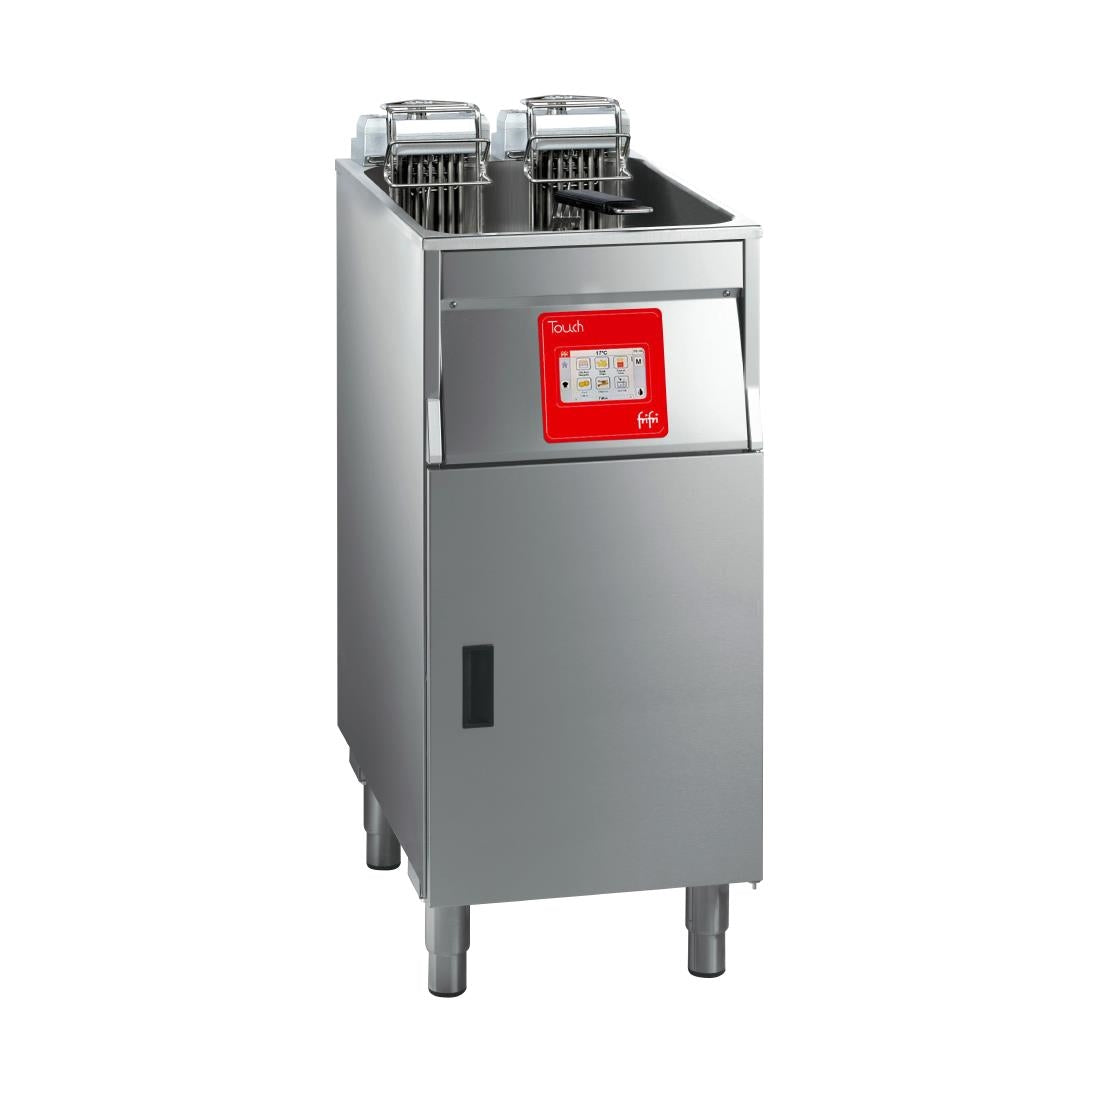 HS007-3PH FriFri Touch 411 Electric Free-Standing Single Tank Fryer 1 Basket 18kW - Three Phase